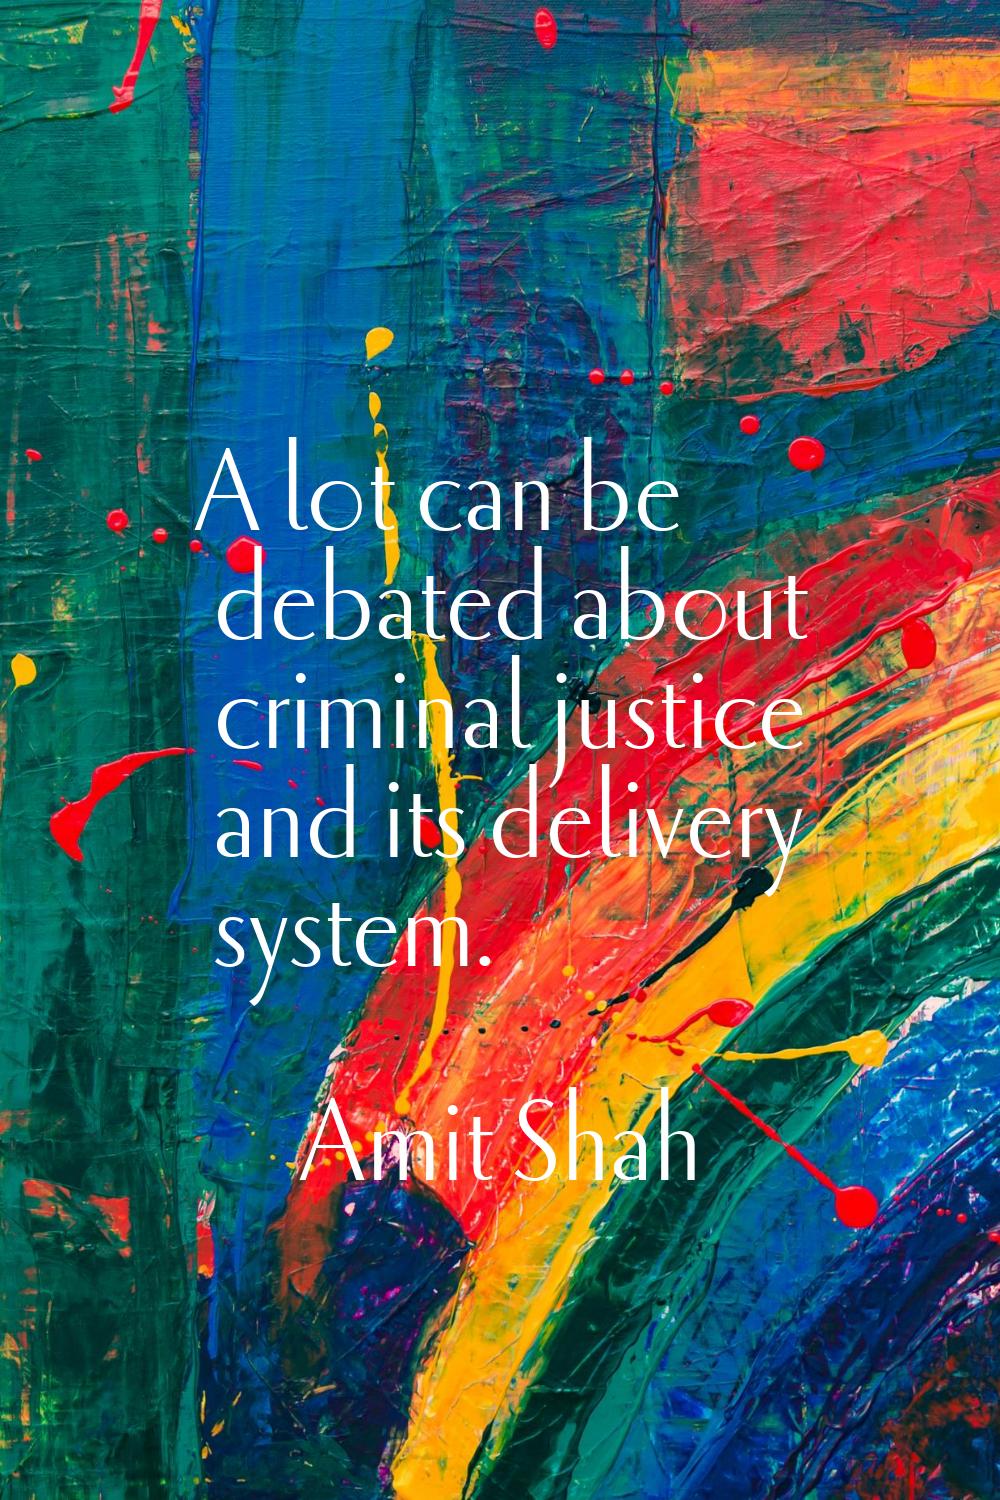 A lot can be debated about criminal justice and its delivery system.